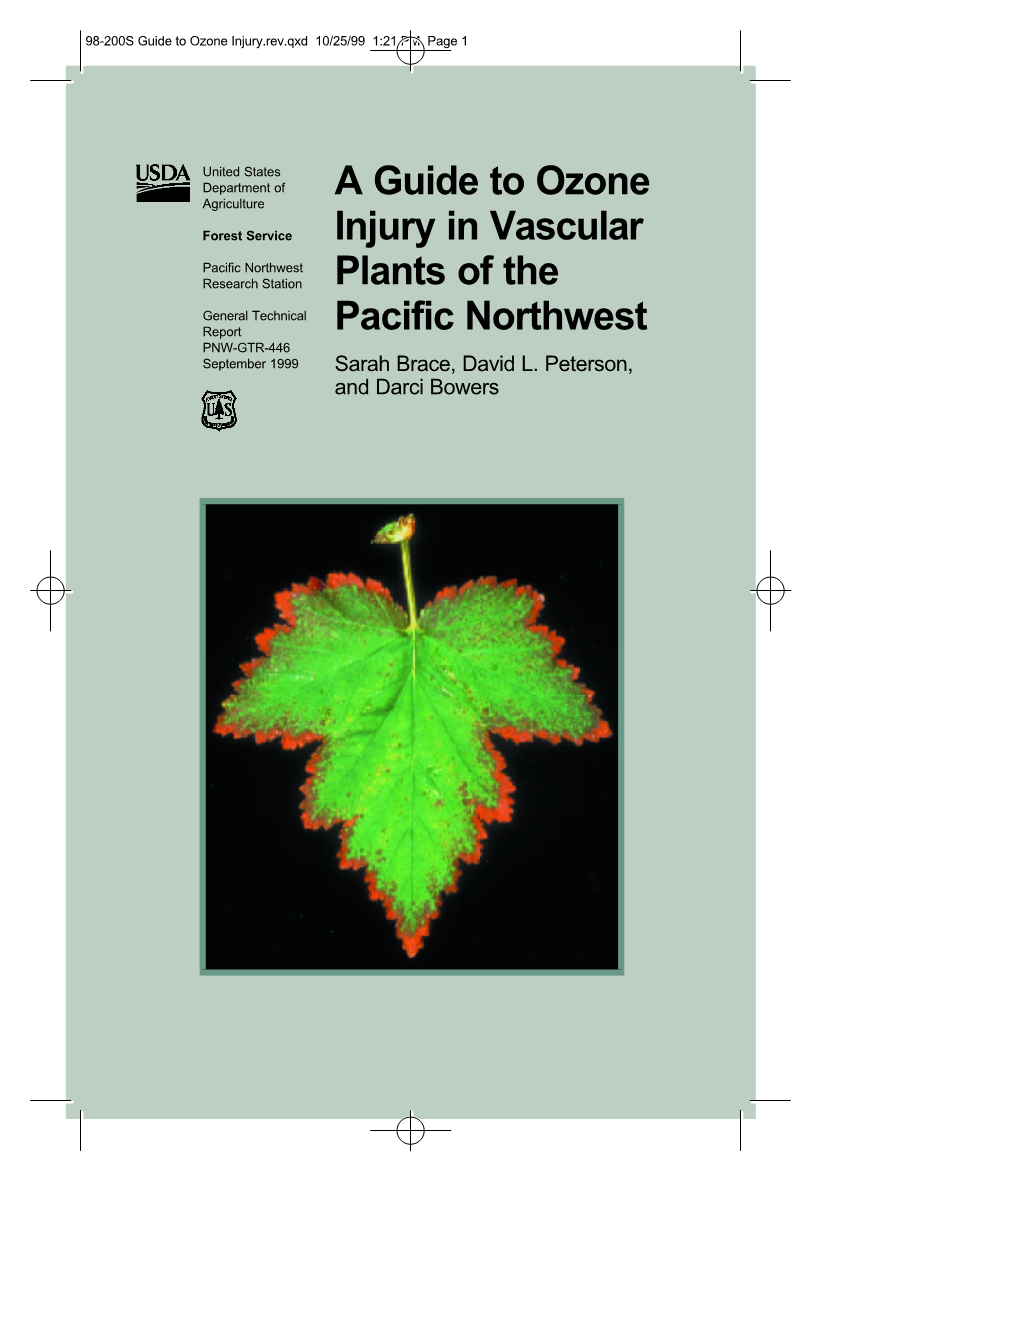 Guide to Ozone Injury in Vascular Plants of the Pacific Northwest Sarah Brace, David L